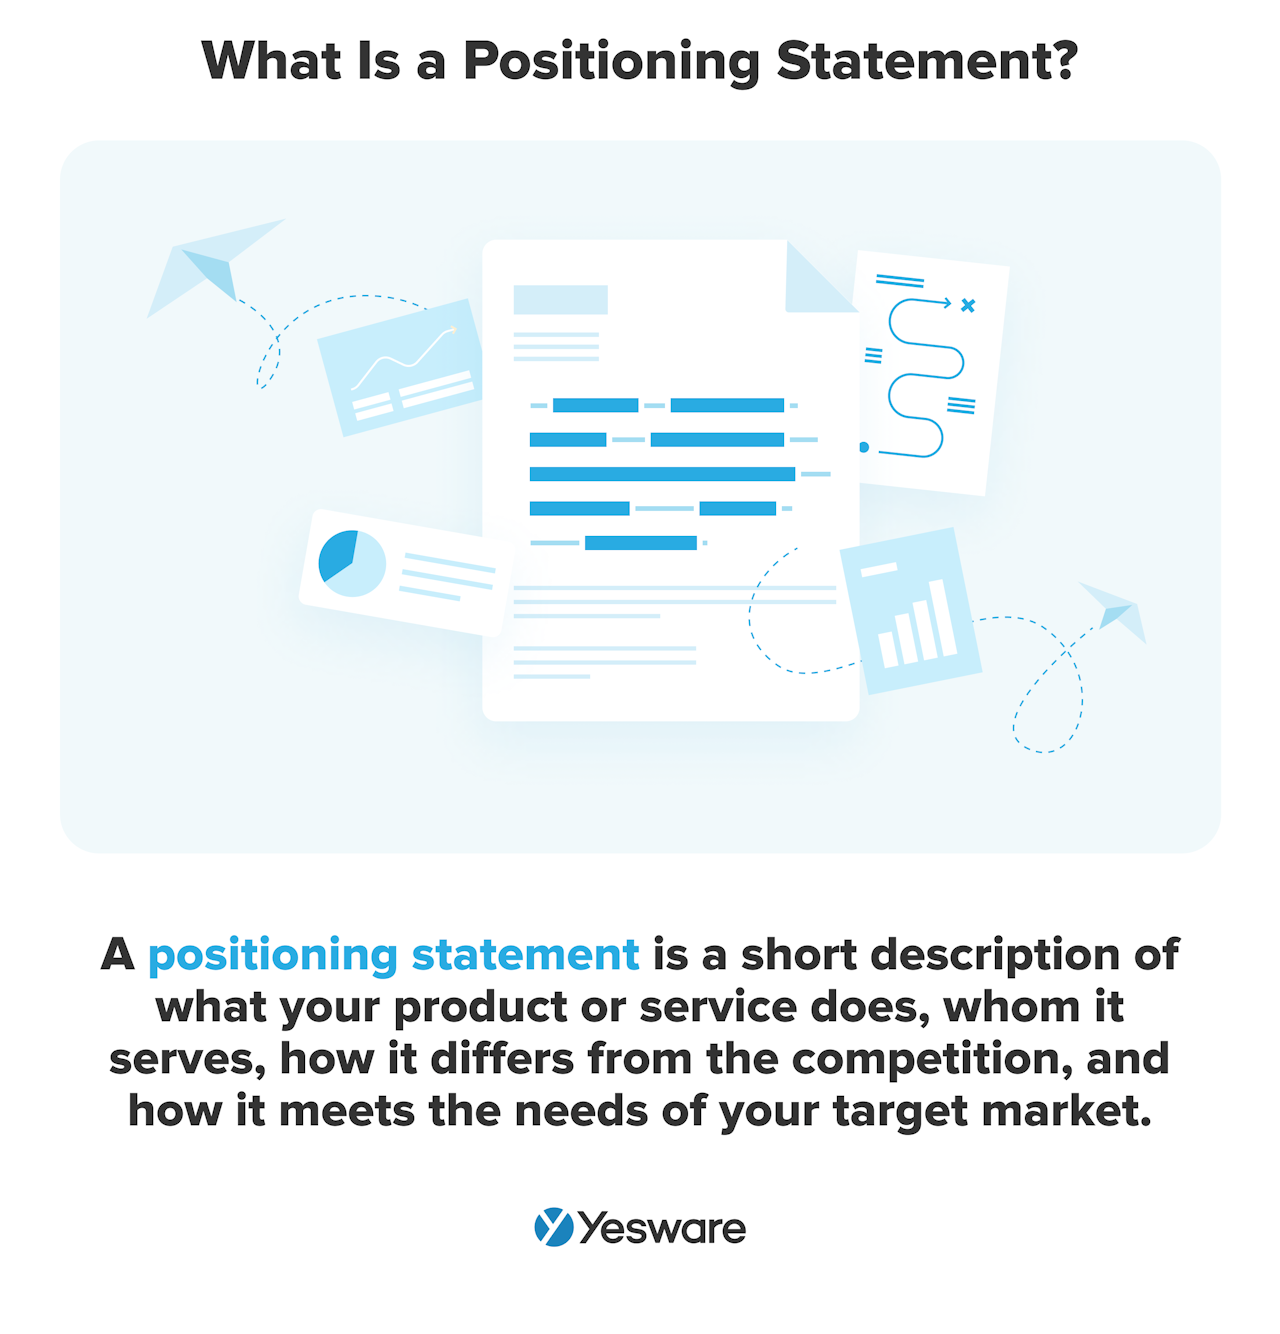 what is a positioning statement?